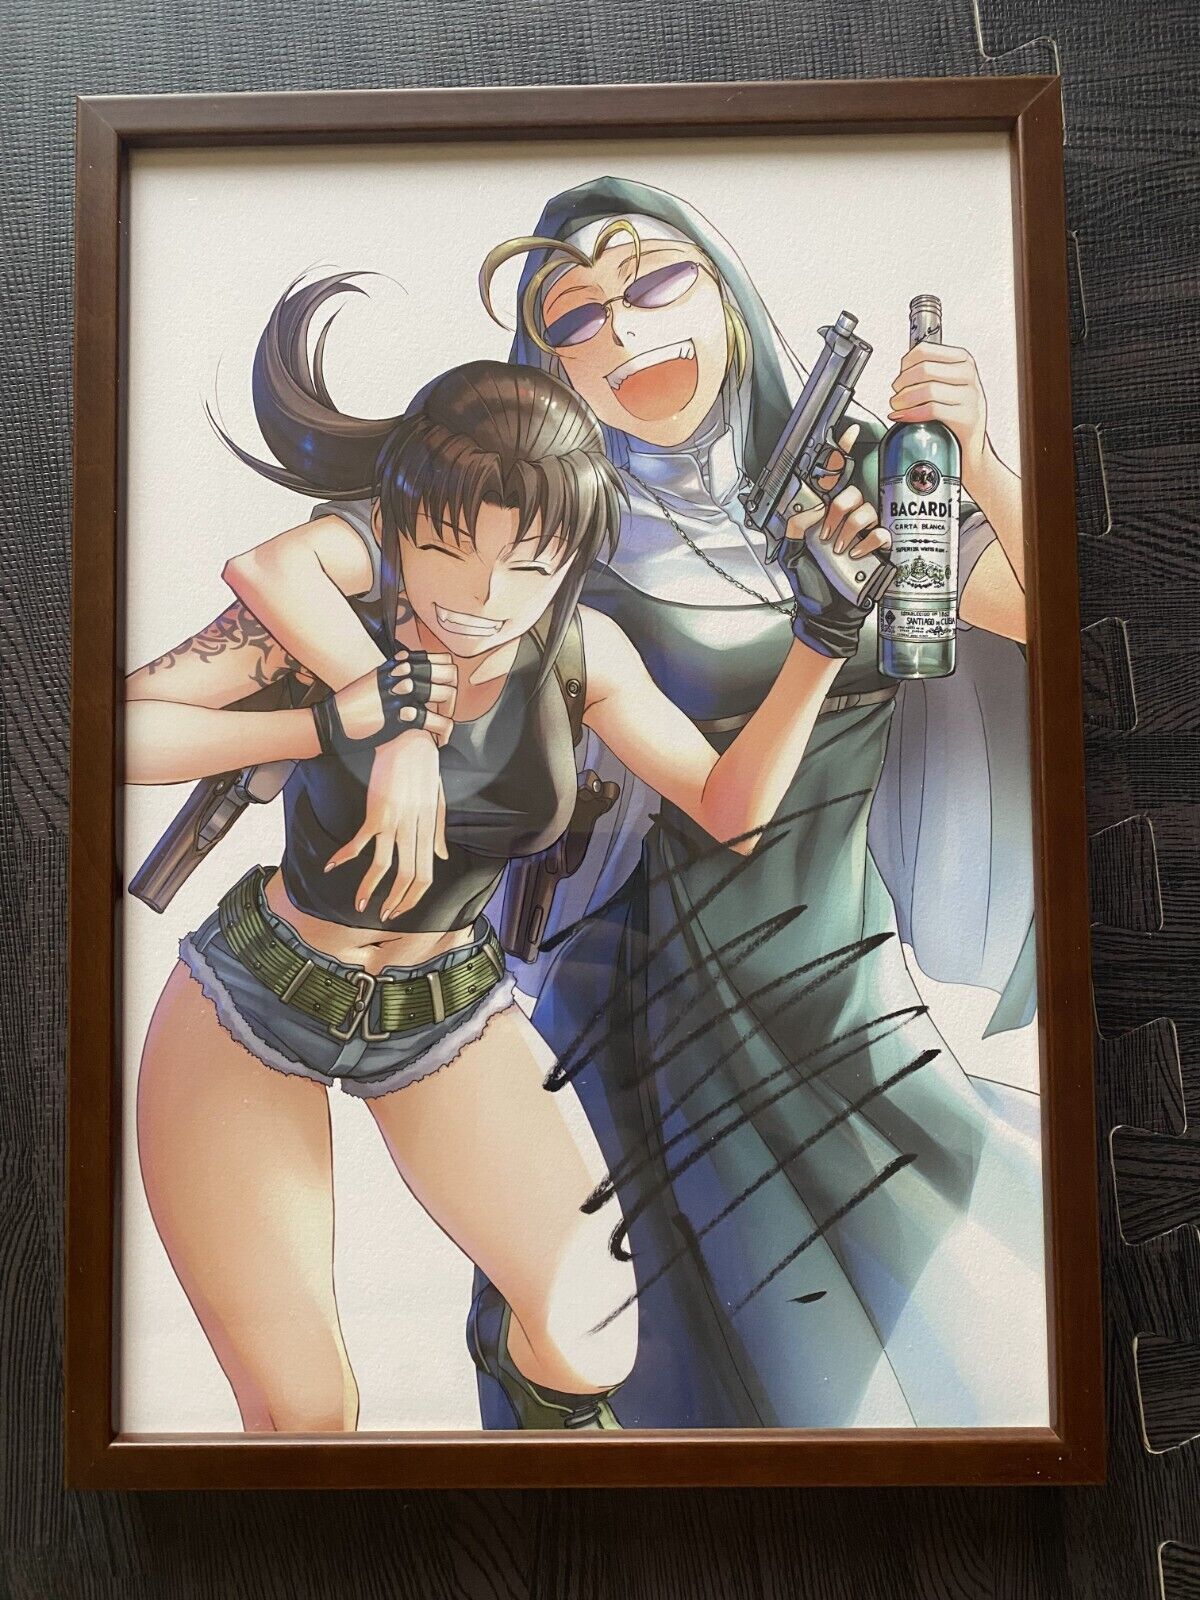 Black Lagoon Original Reproduction Art Revy Eda with Autographed by Rei Hiroe